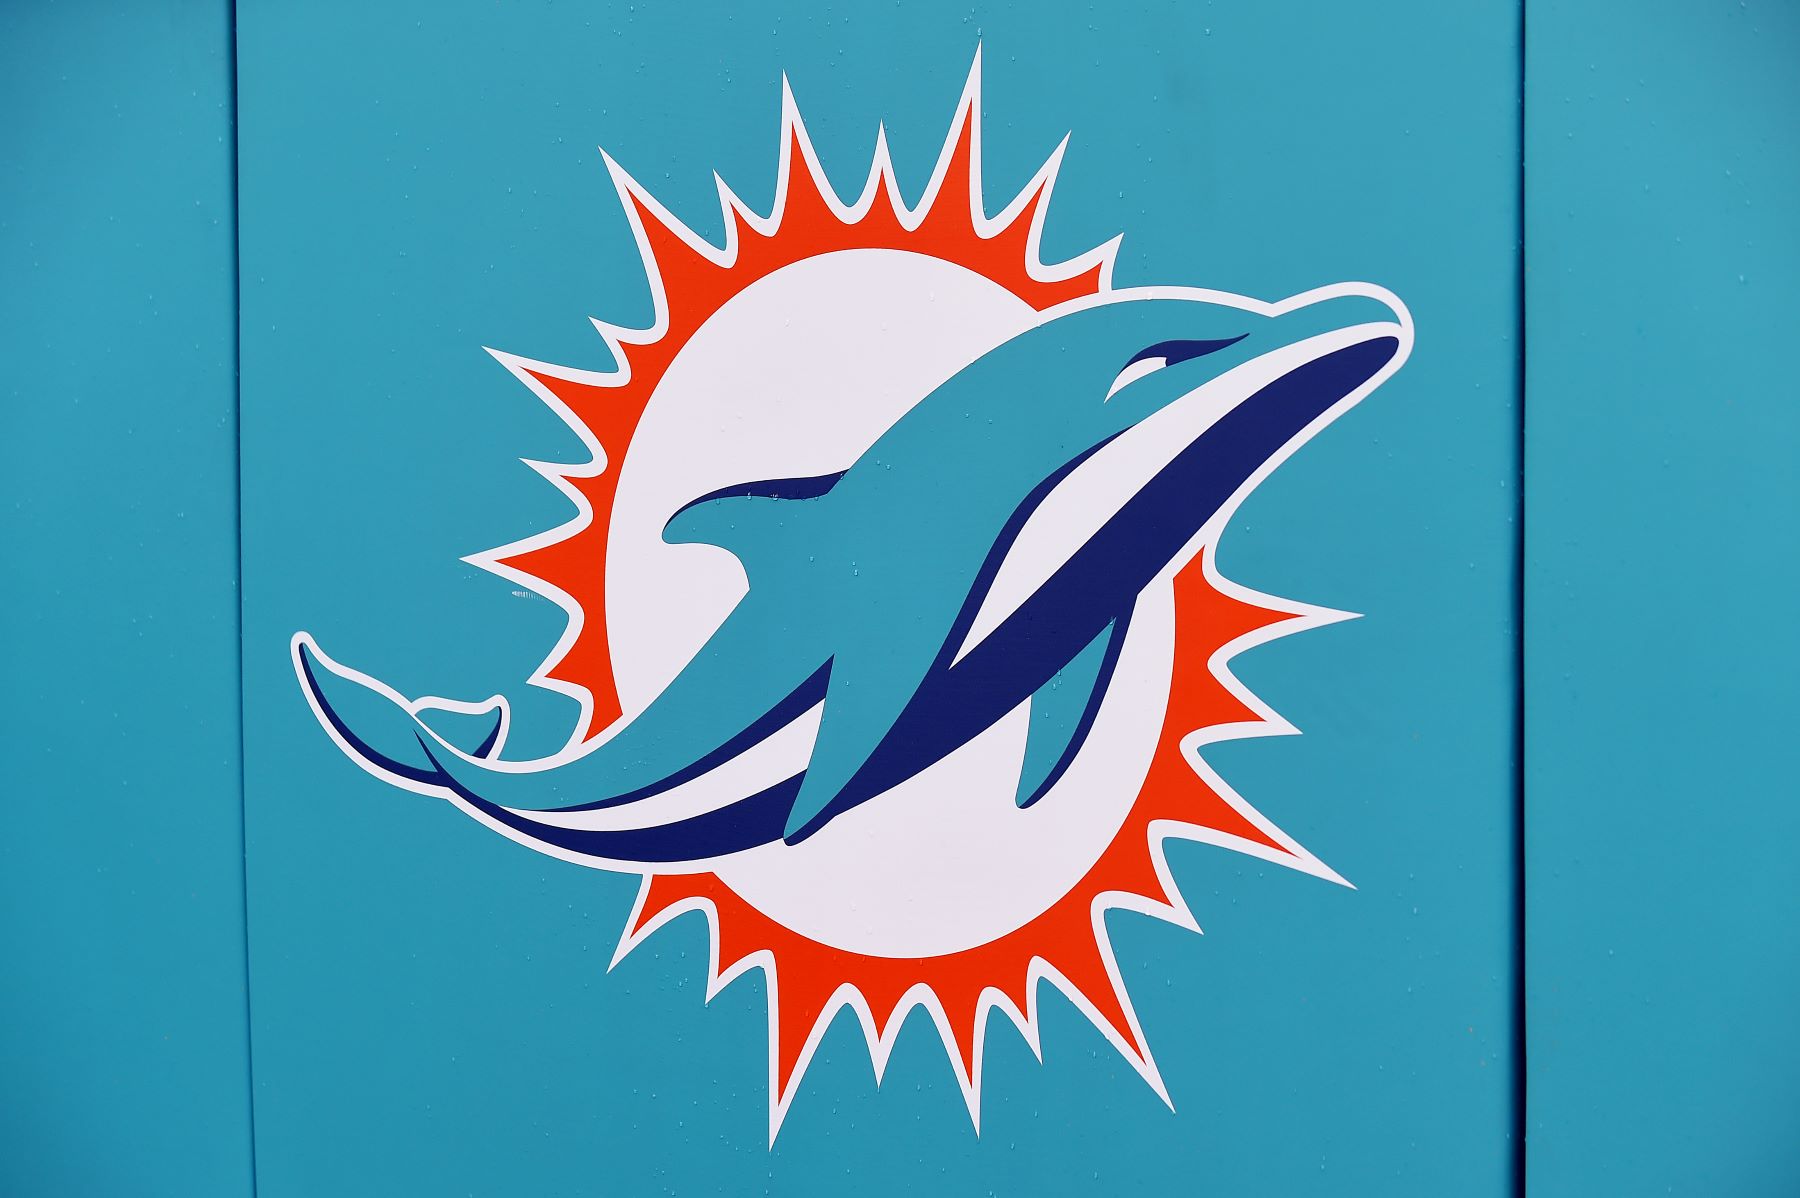 NFL team Miami Dolphins logo seen at the Miami Gardens before a game against the New York Jets